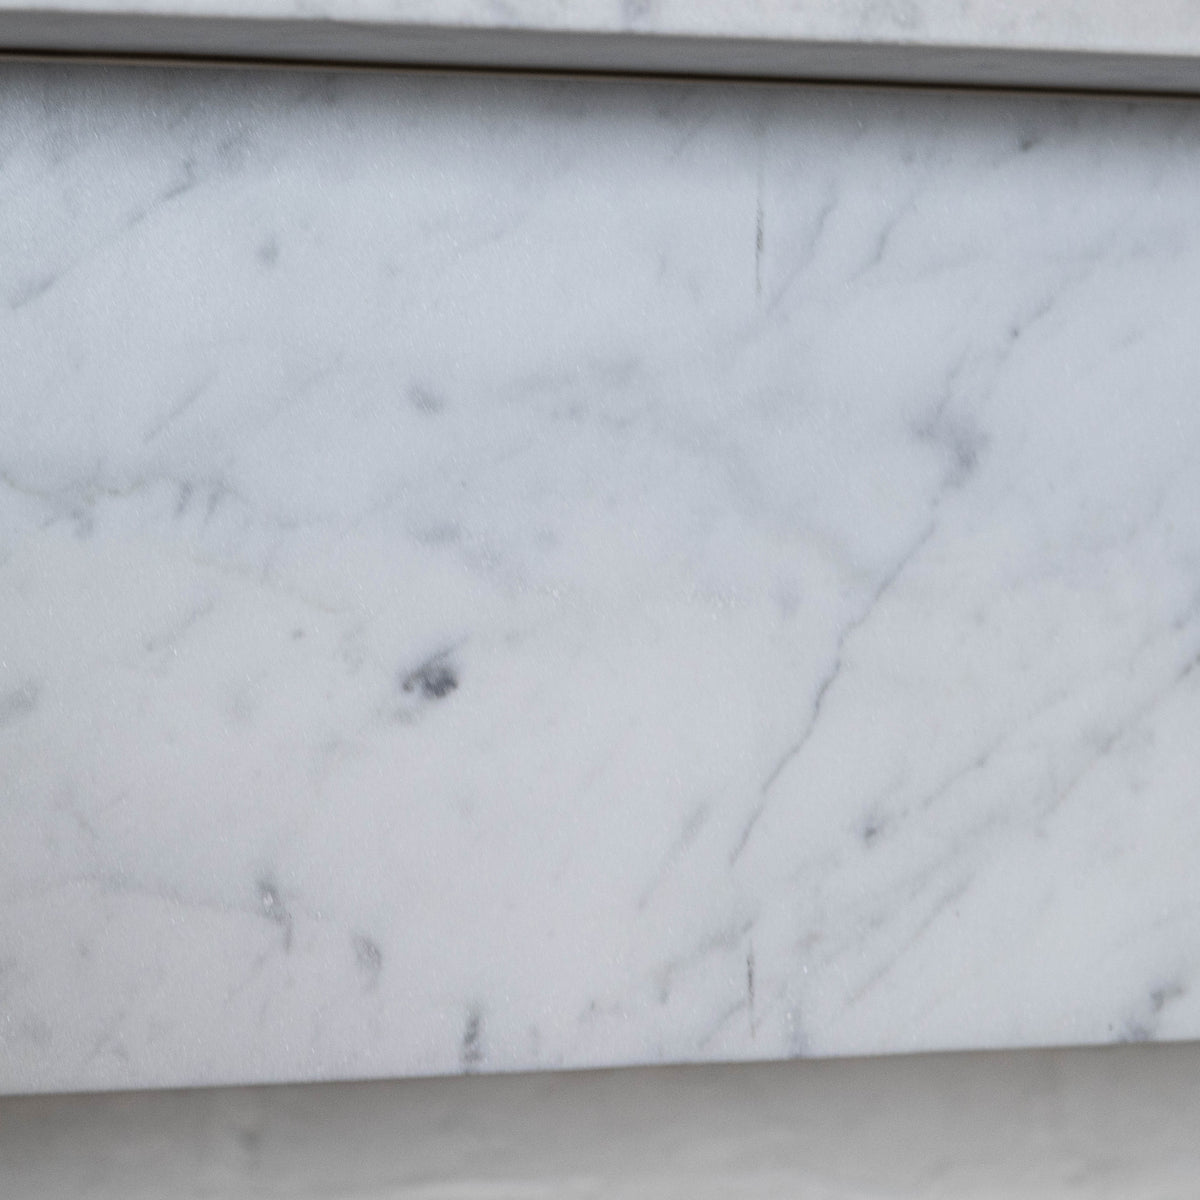 Early Victorian, Late Georgian Style Carrara Marble Fire Surround | The Architectural Forum